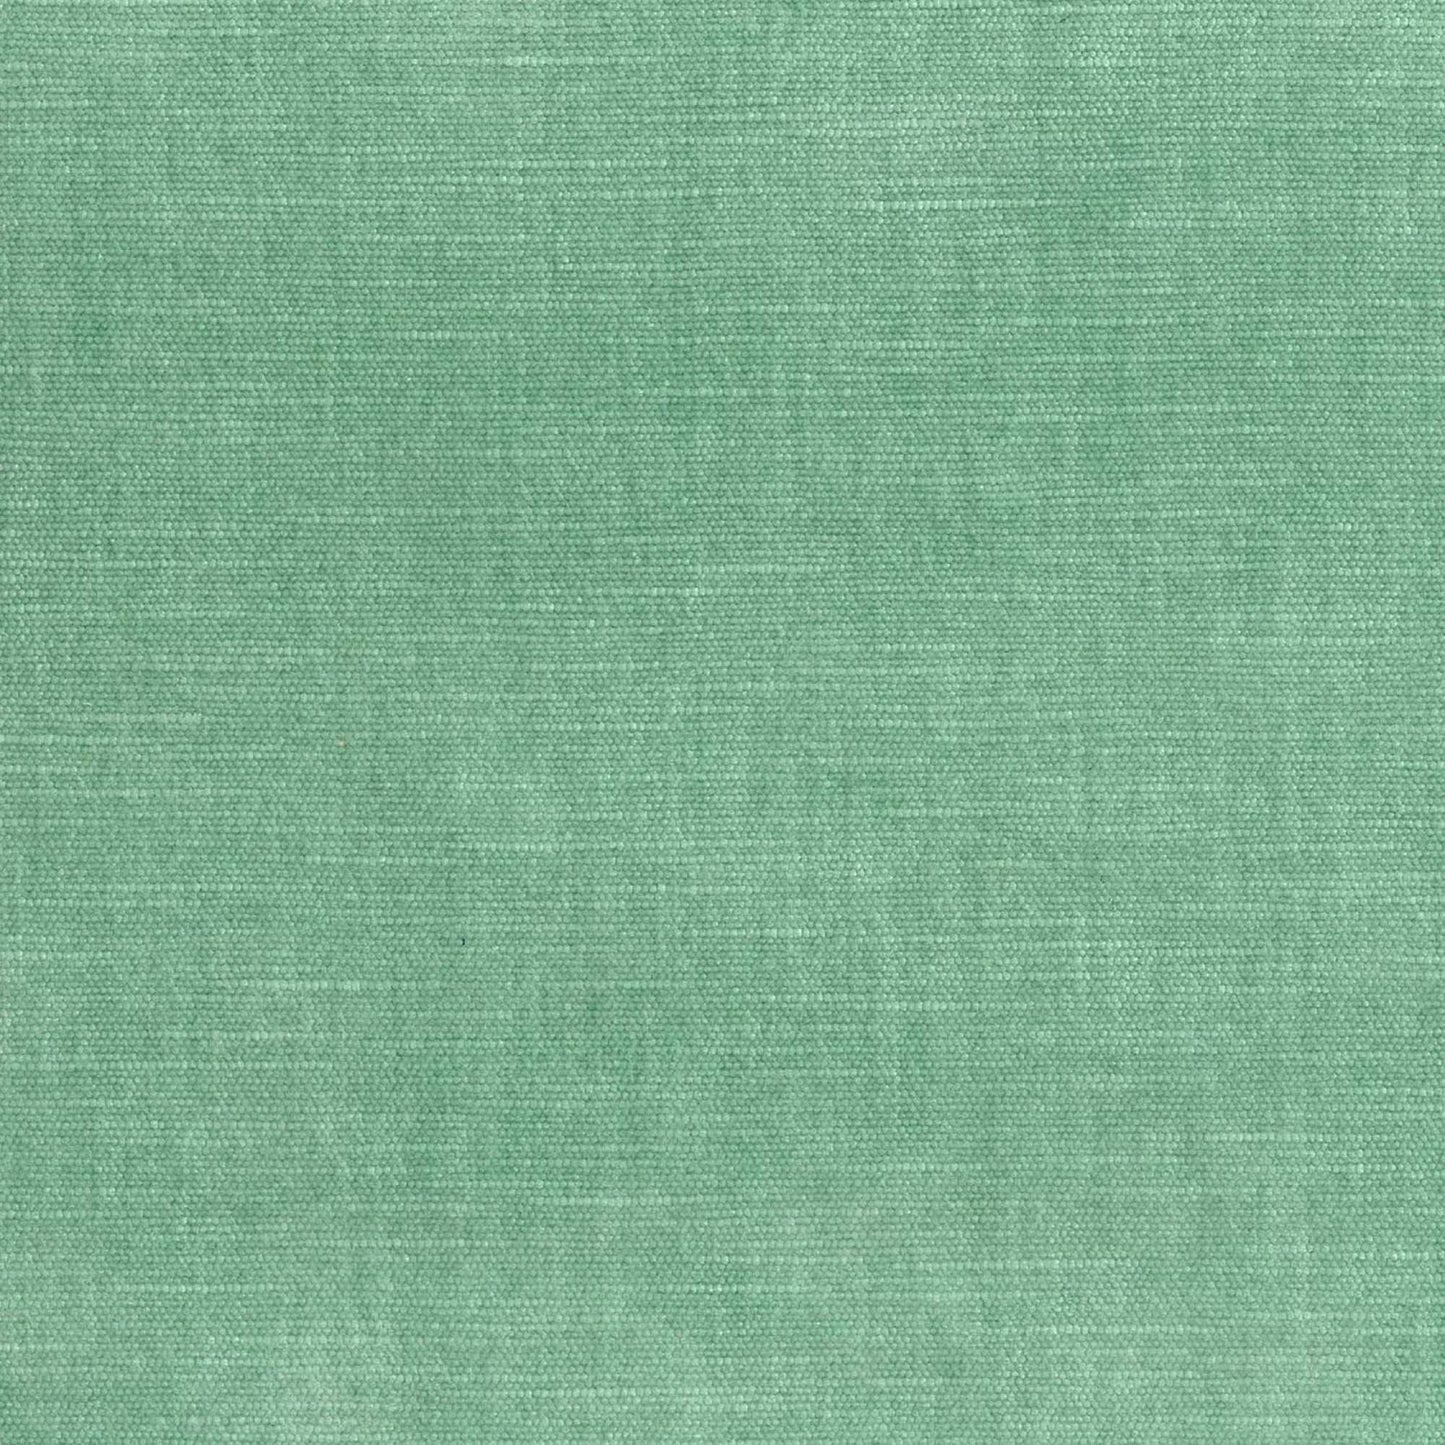 ORLEANS CLOVER FABRIC SAMPLE | PREMIUM COLLECTION